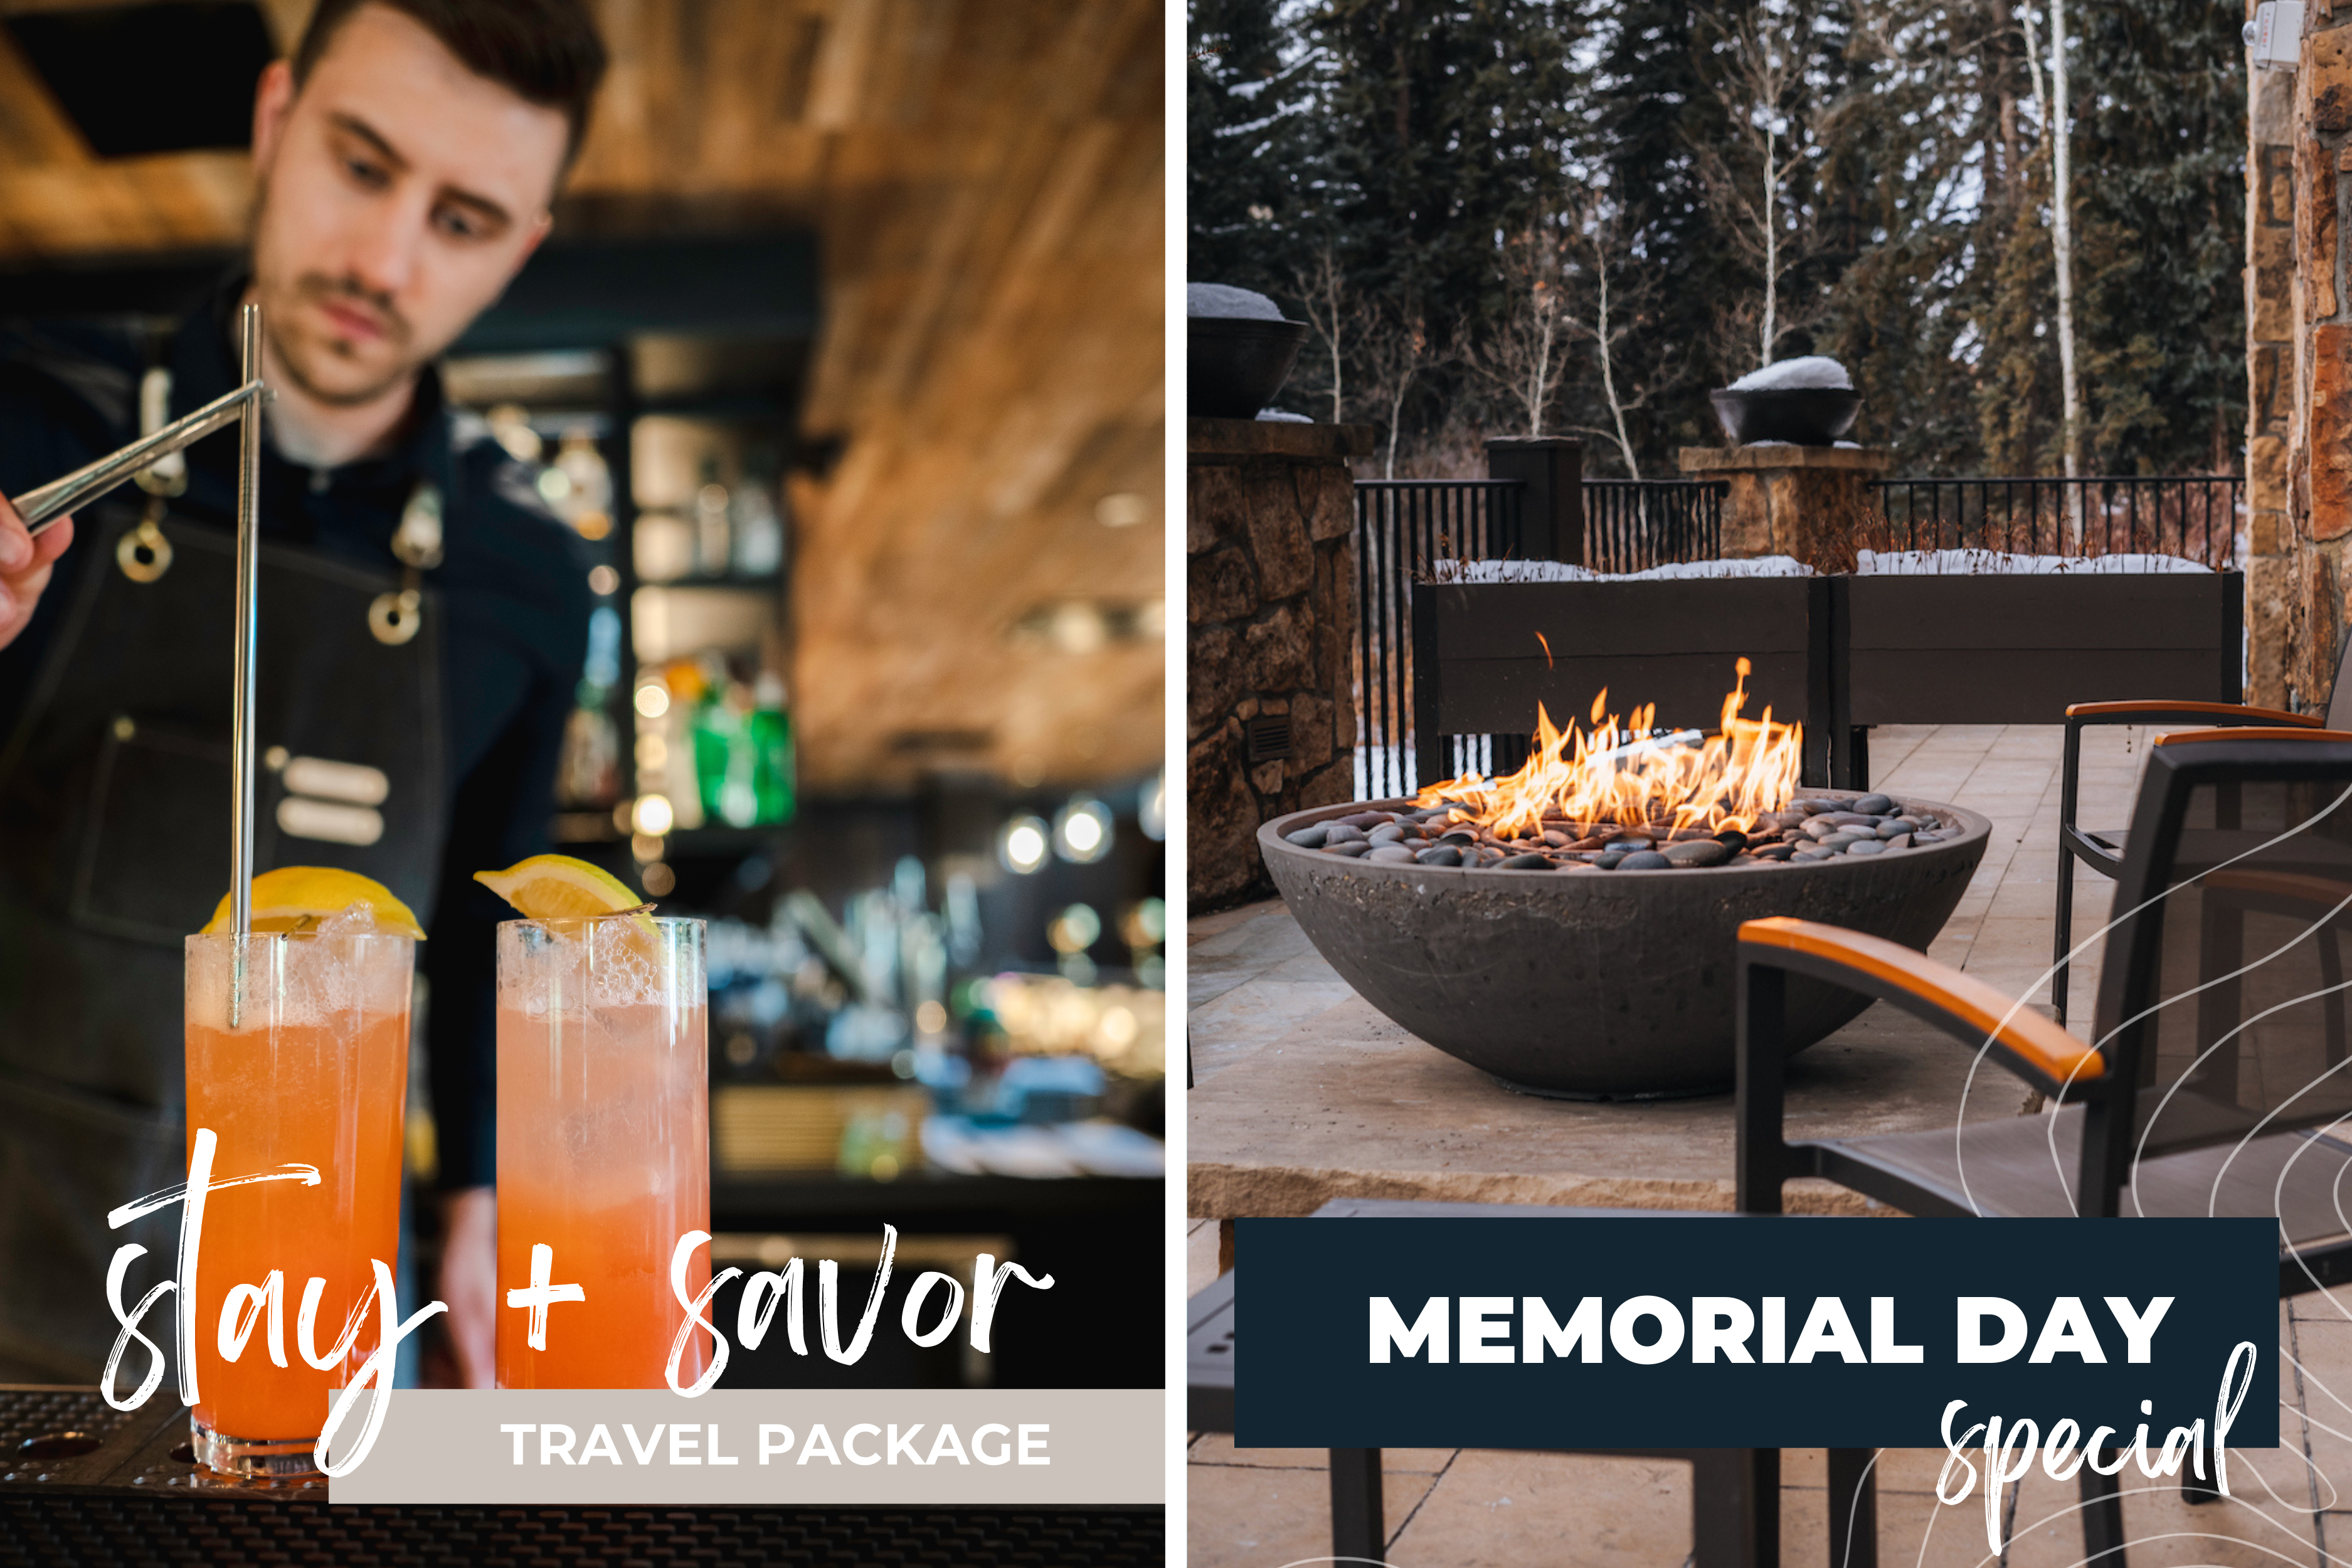 Gravity Haus Vail Hole Stay + Savor and Memorial Day Promo